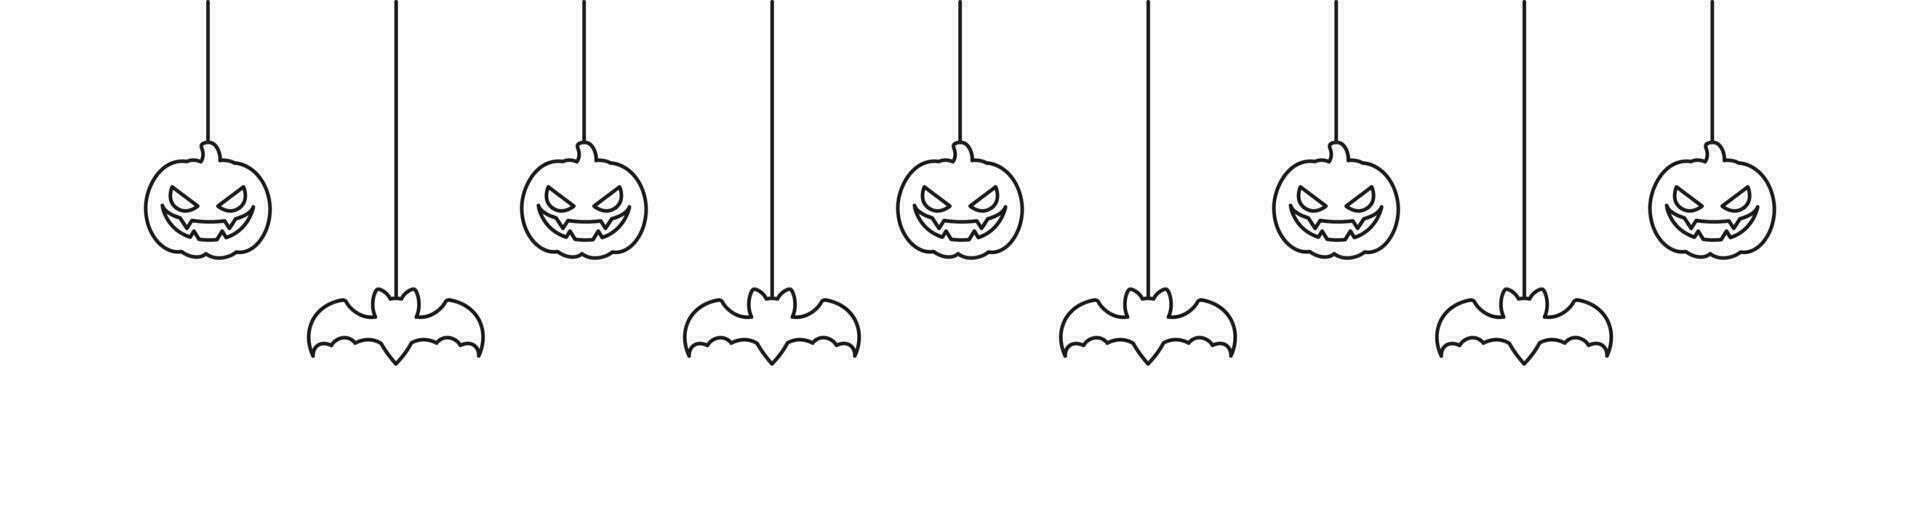 Happy Halloween banner or border with bats and jack o lantern pumpkins outline doodle. Hanging Spooky Ornaments Decoration Vector illustration, trick or treat party invitation